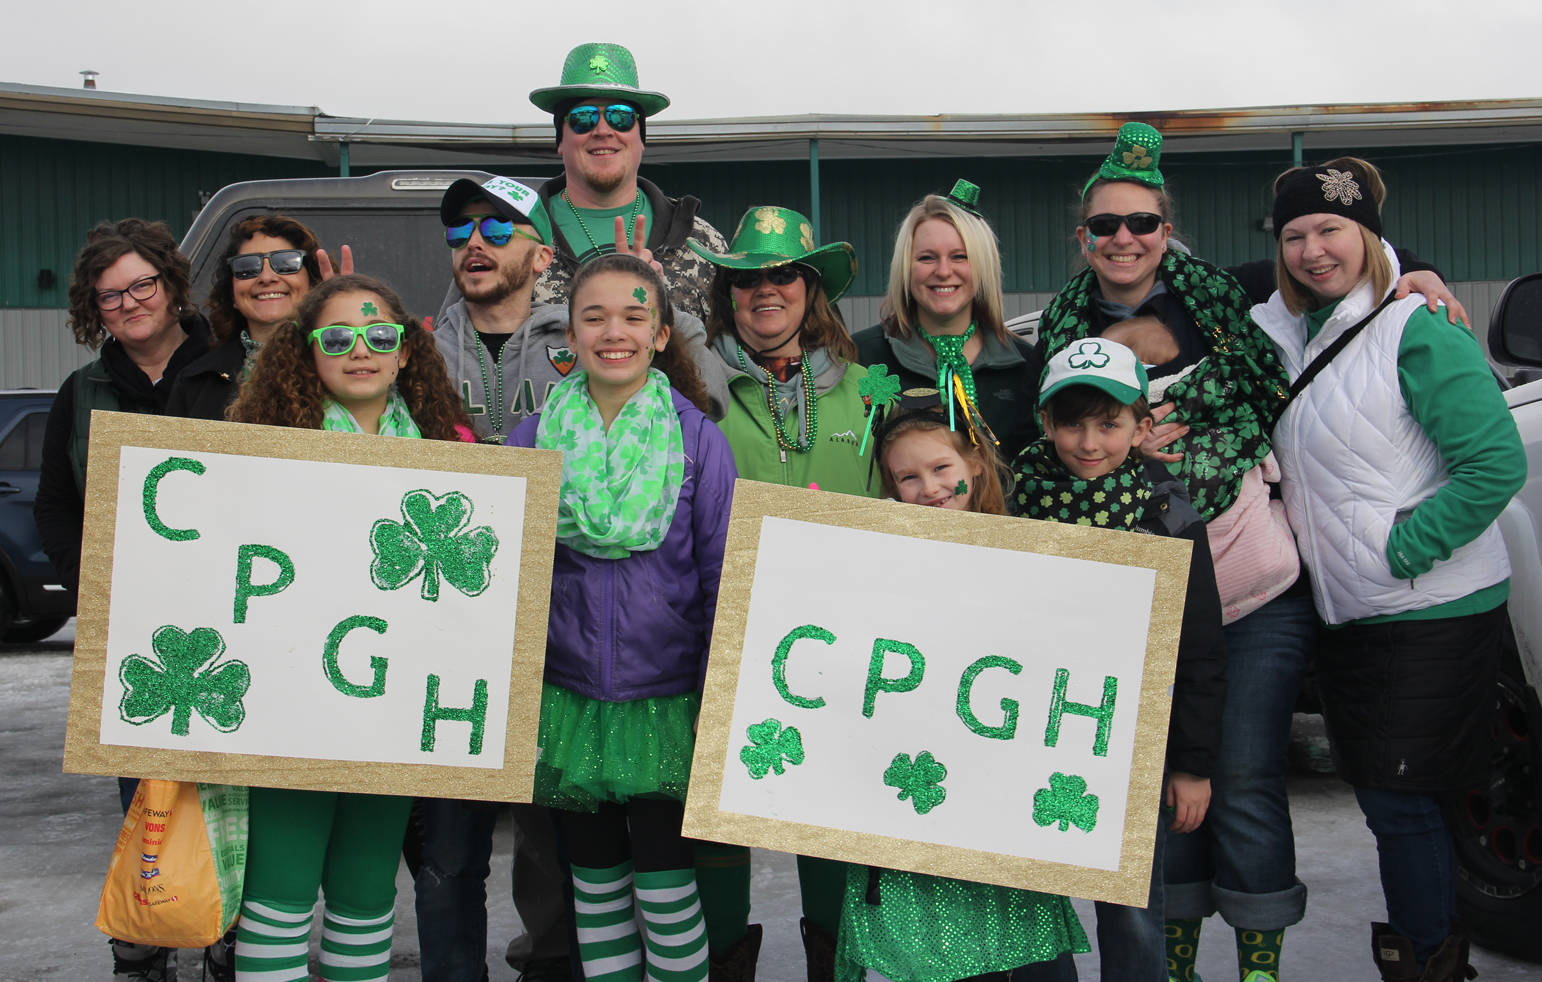 Slushy conditions don’t dampen the luck of the Irish for CPGH.